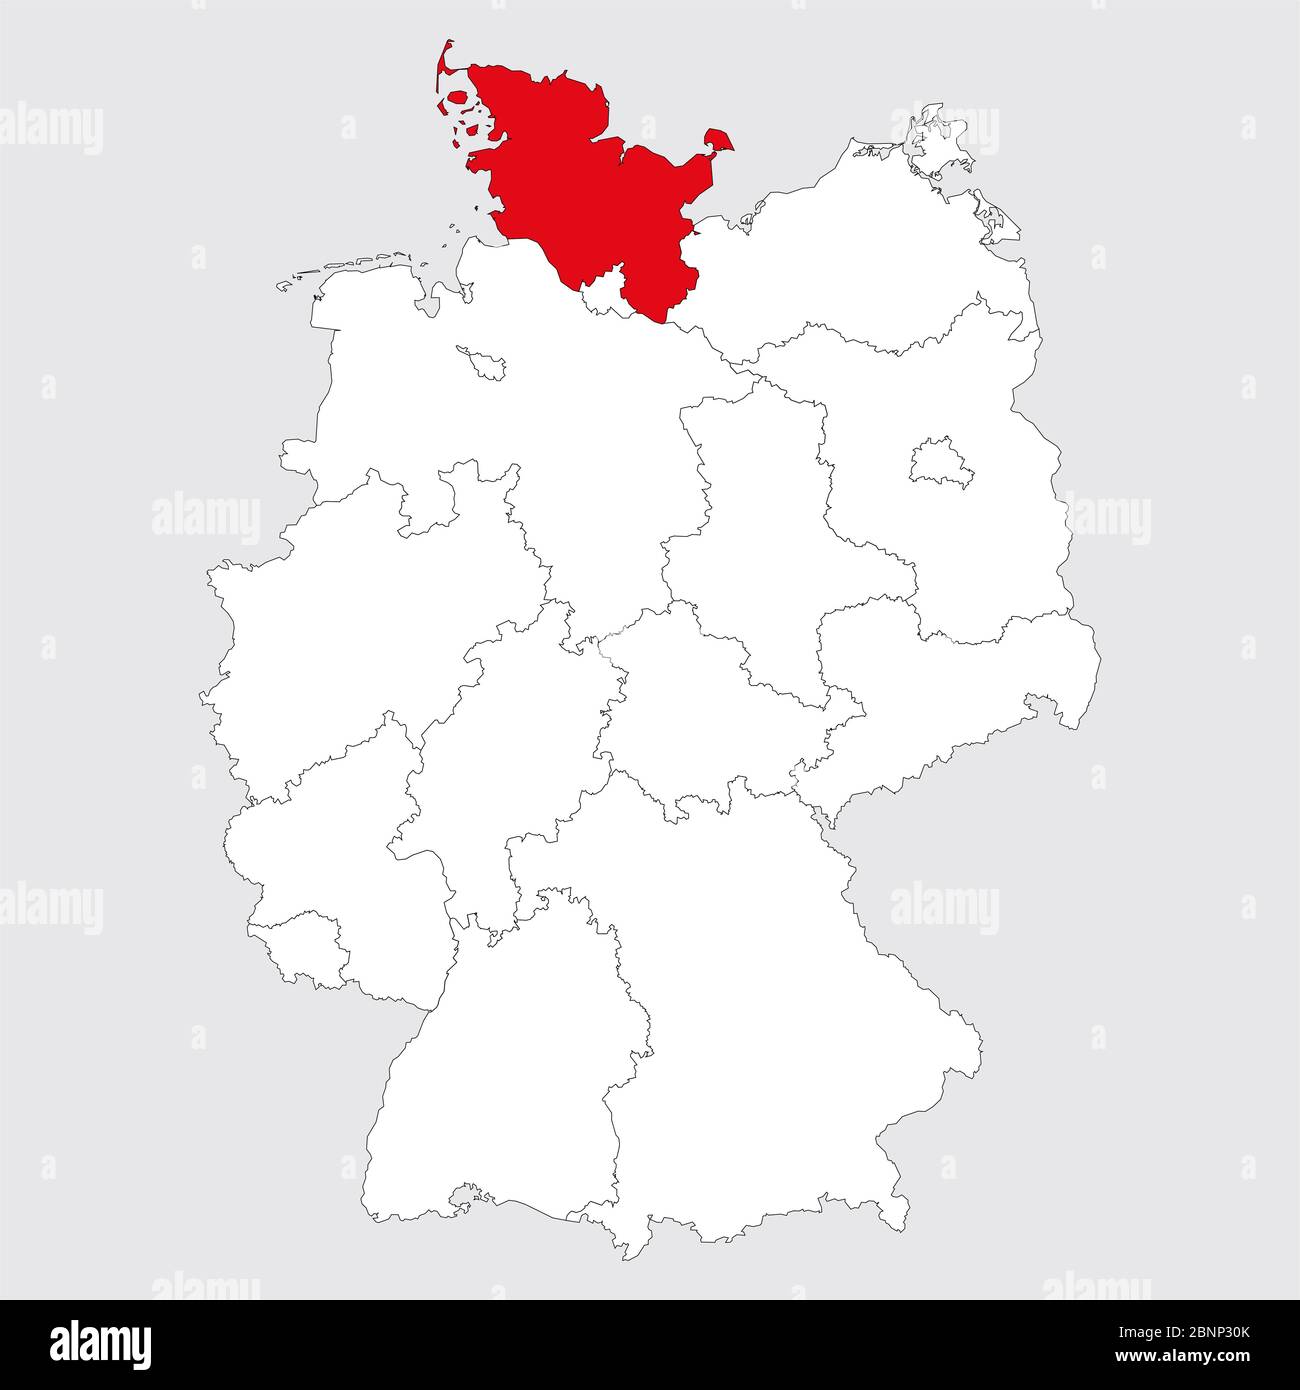 Schleswig holstein province highlighted red on germany map. Gray background. German political map. Stock Vector